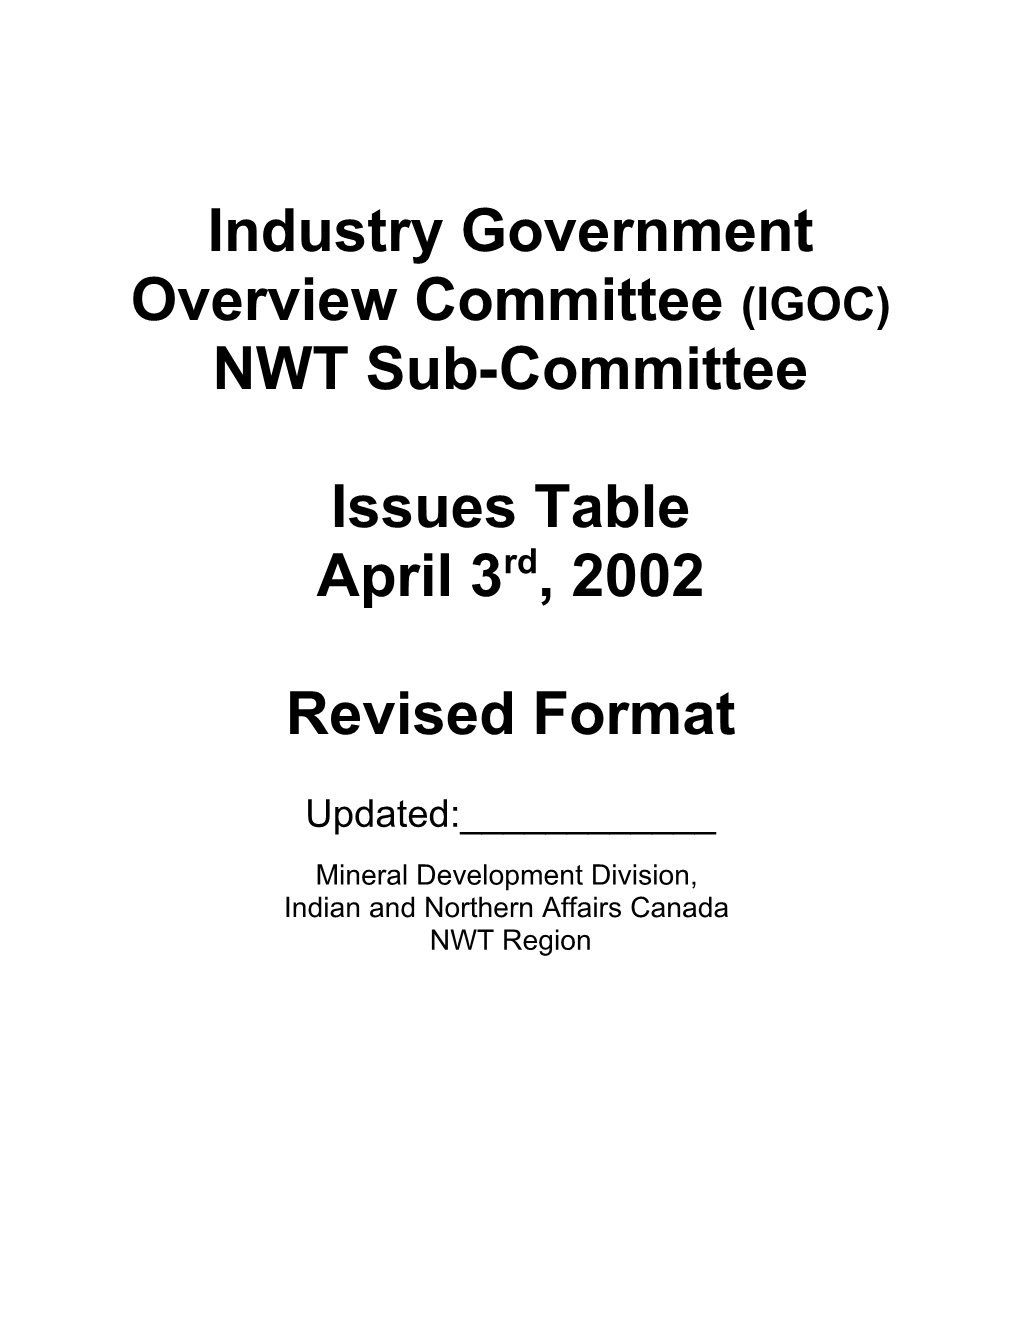 Industry Government Overview Committee (IGOC)